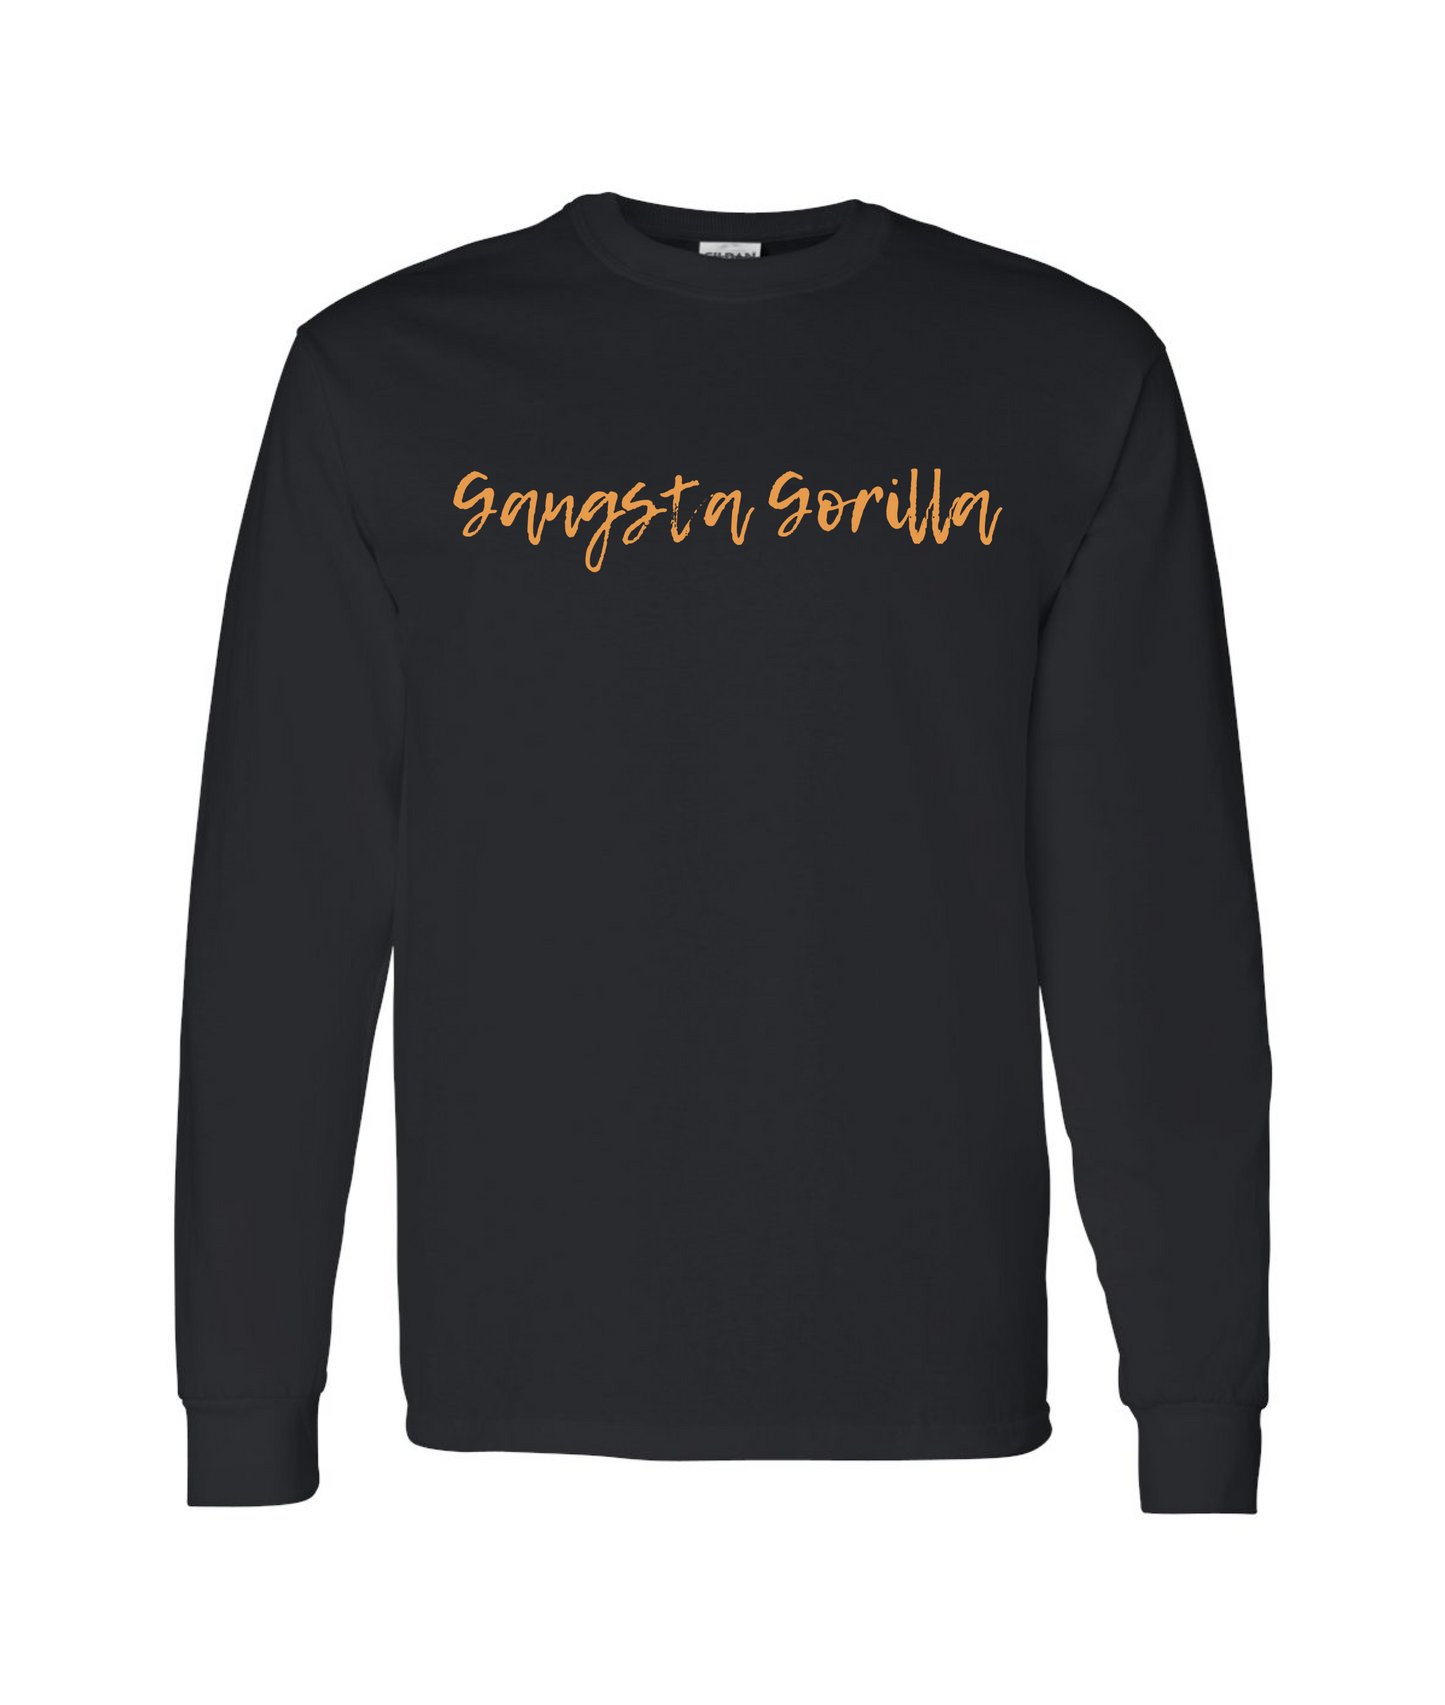 Gangsta Gorilla Extracts and Apparel - LOVE NOT HATE - Black Long Sleeve T